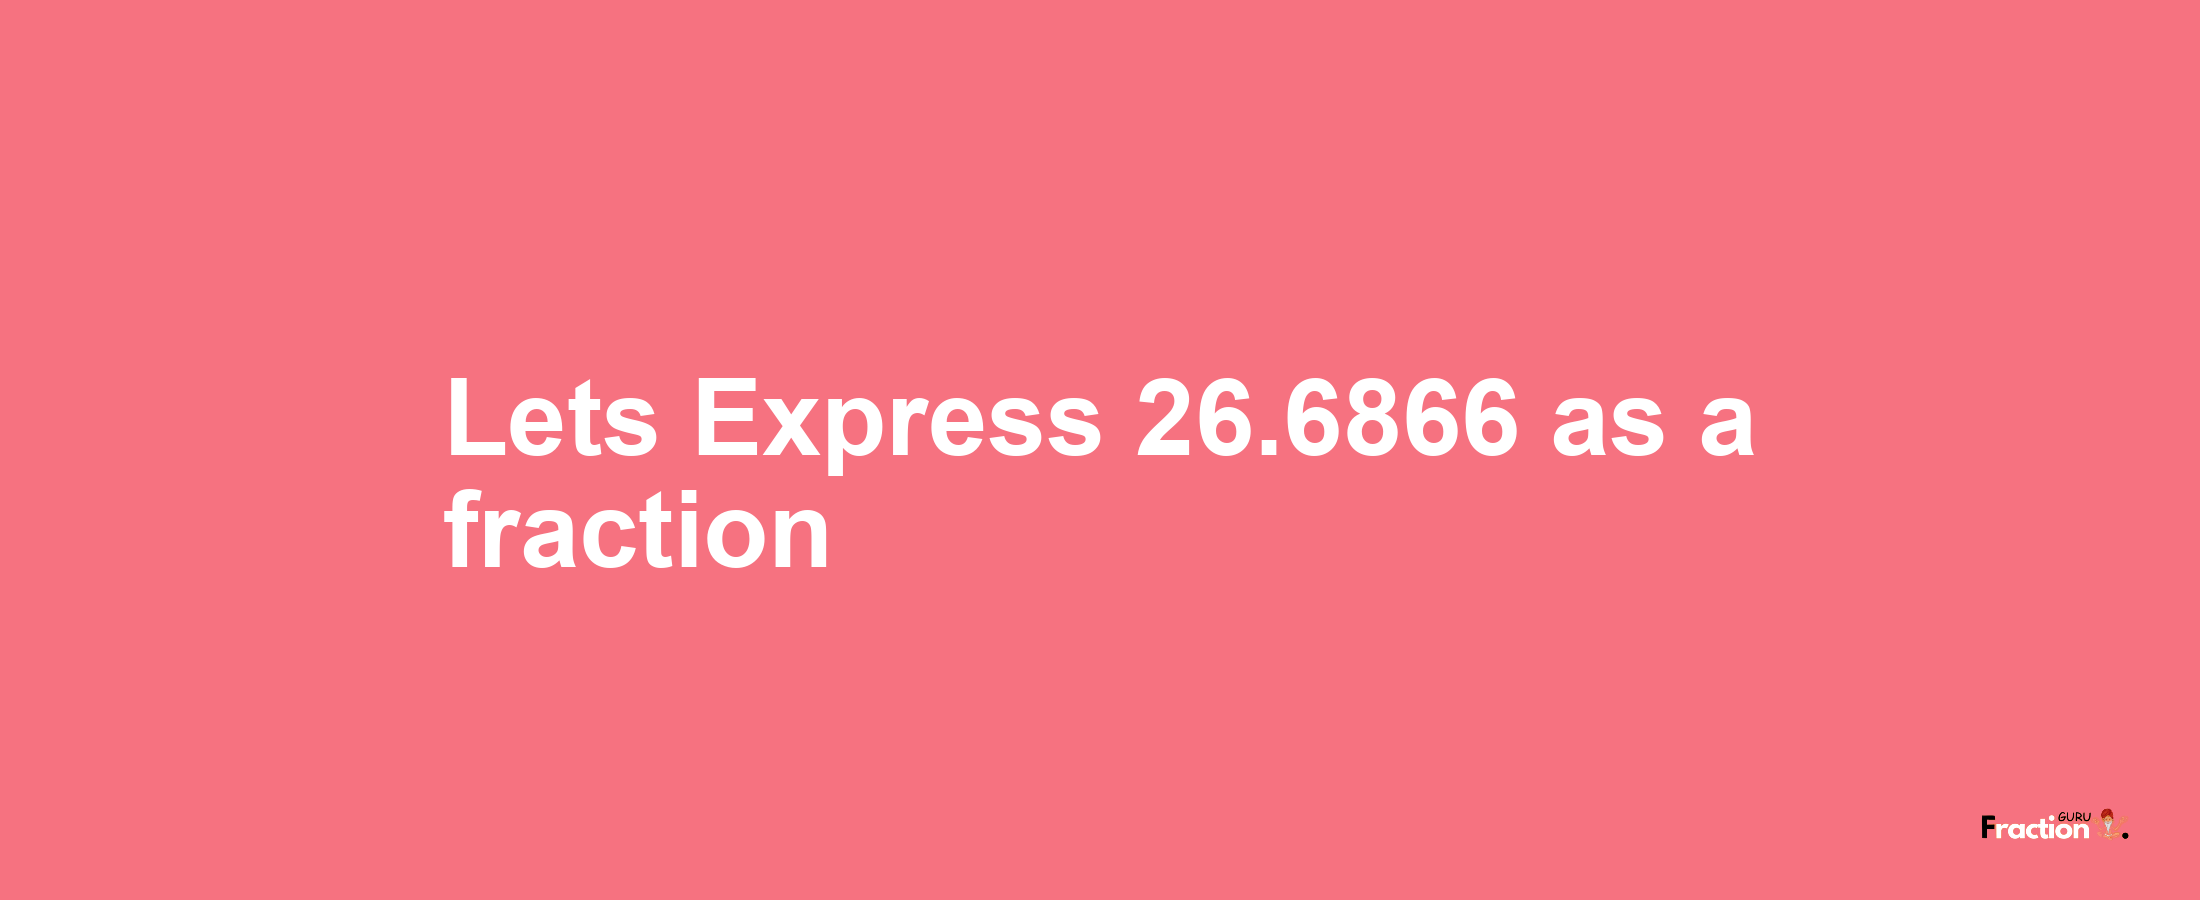 Lets Express 26.6866 as afraction